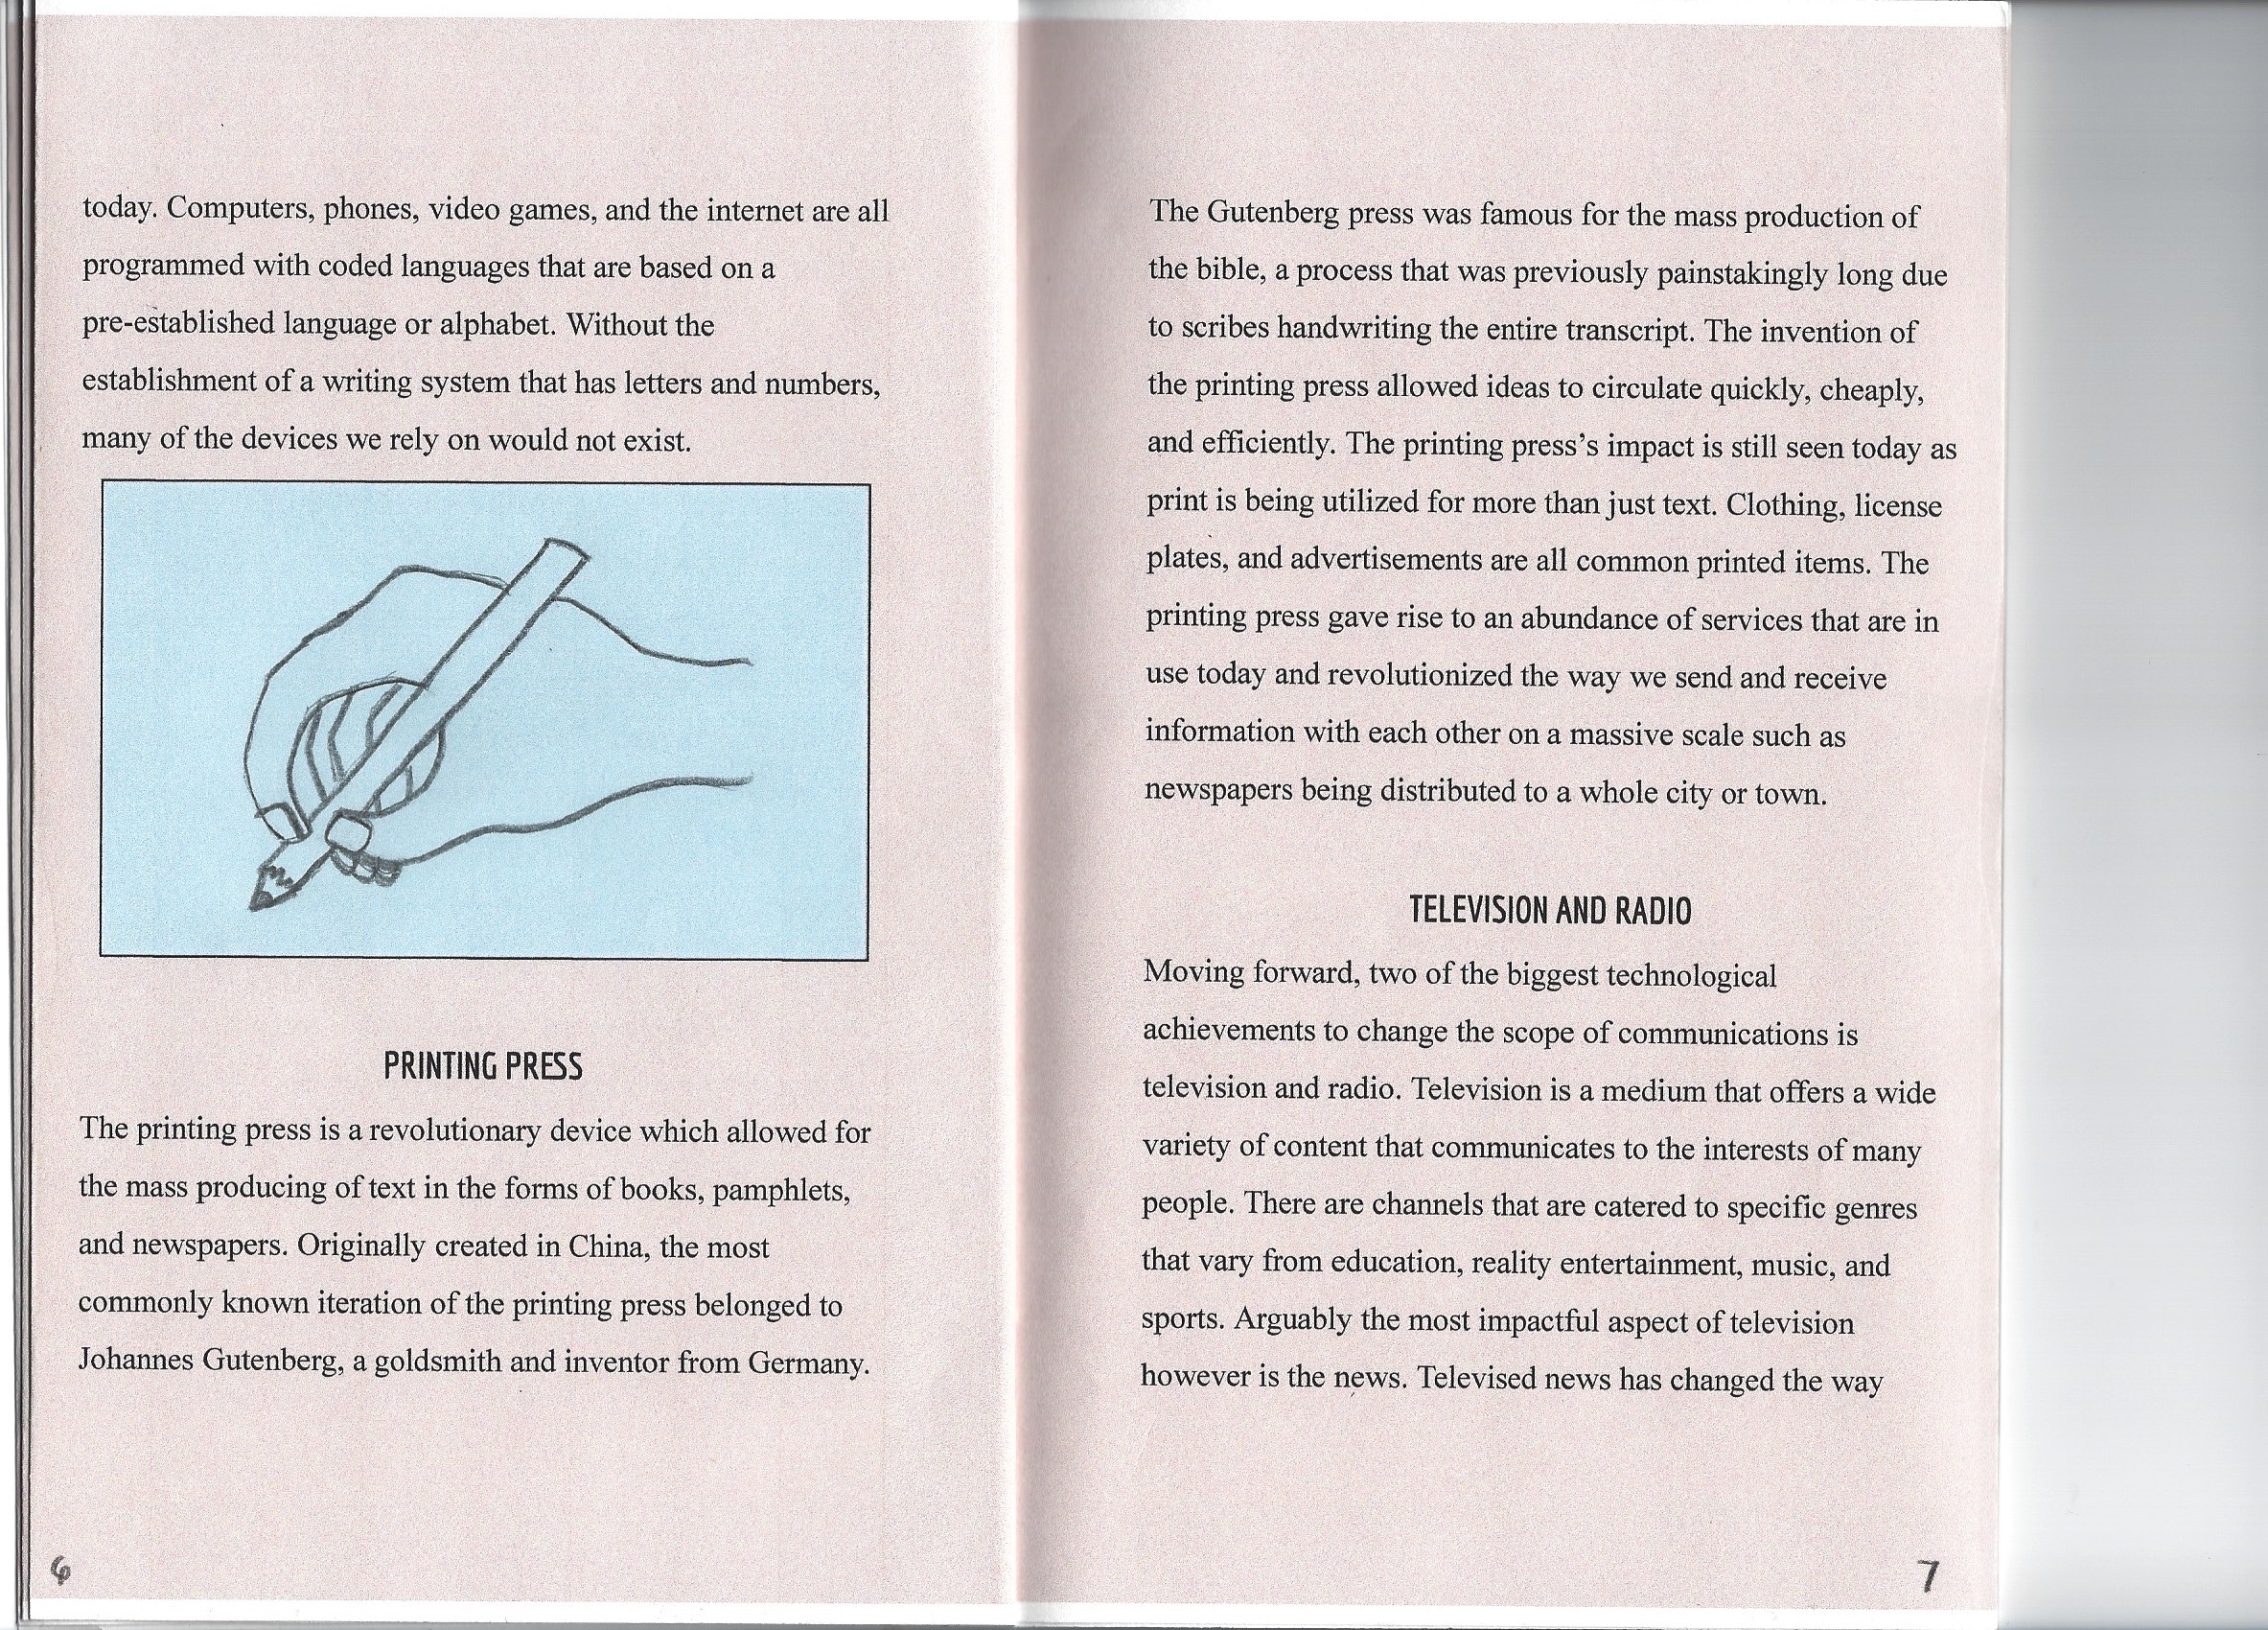 Page 6: This page continues the writing section and includes an illustration of a hand holding a pencil. Towards the bottom of the page the printing press is introduced. Page 7: Continuation of the printing press and introduction to television and radio.